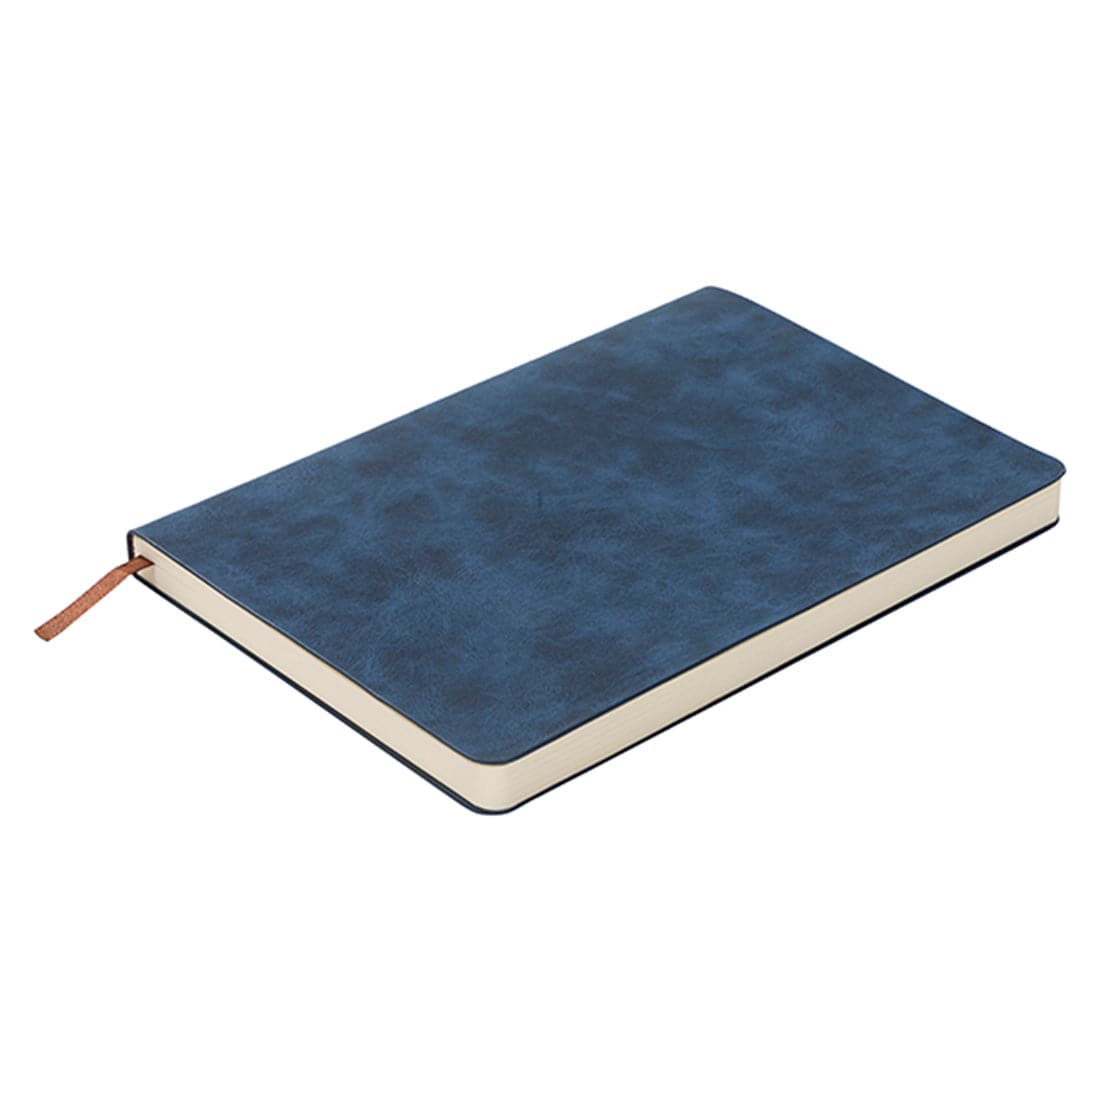 Engravable PU Leather Notebook - Pack of 10 - Joto Imaging Supplies US